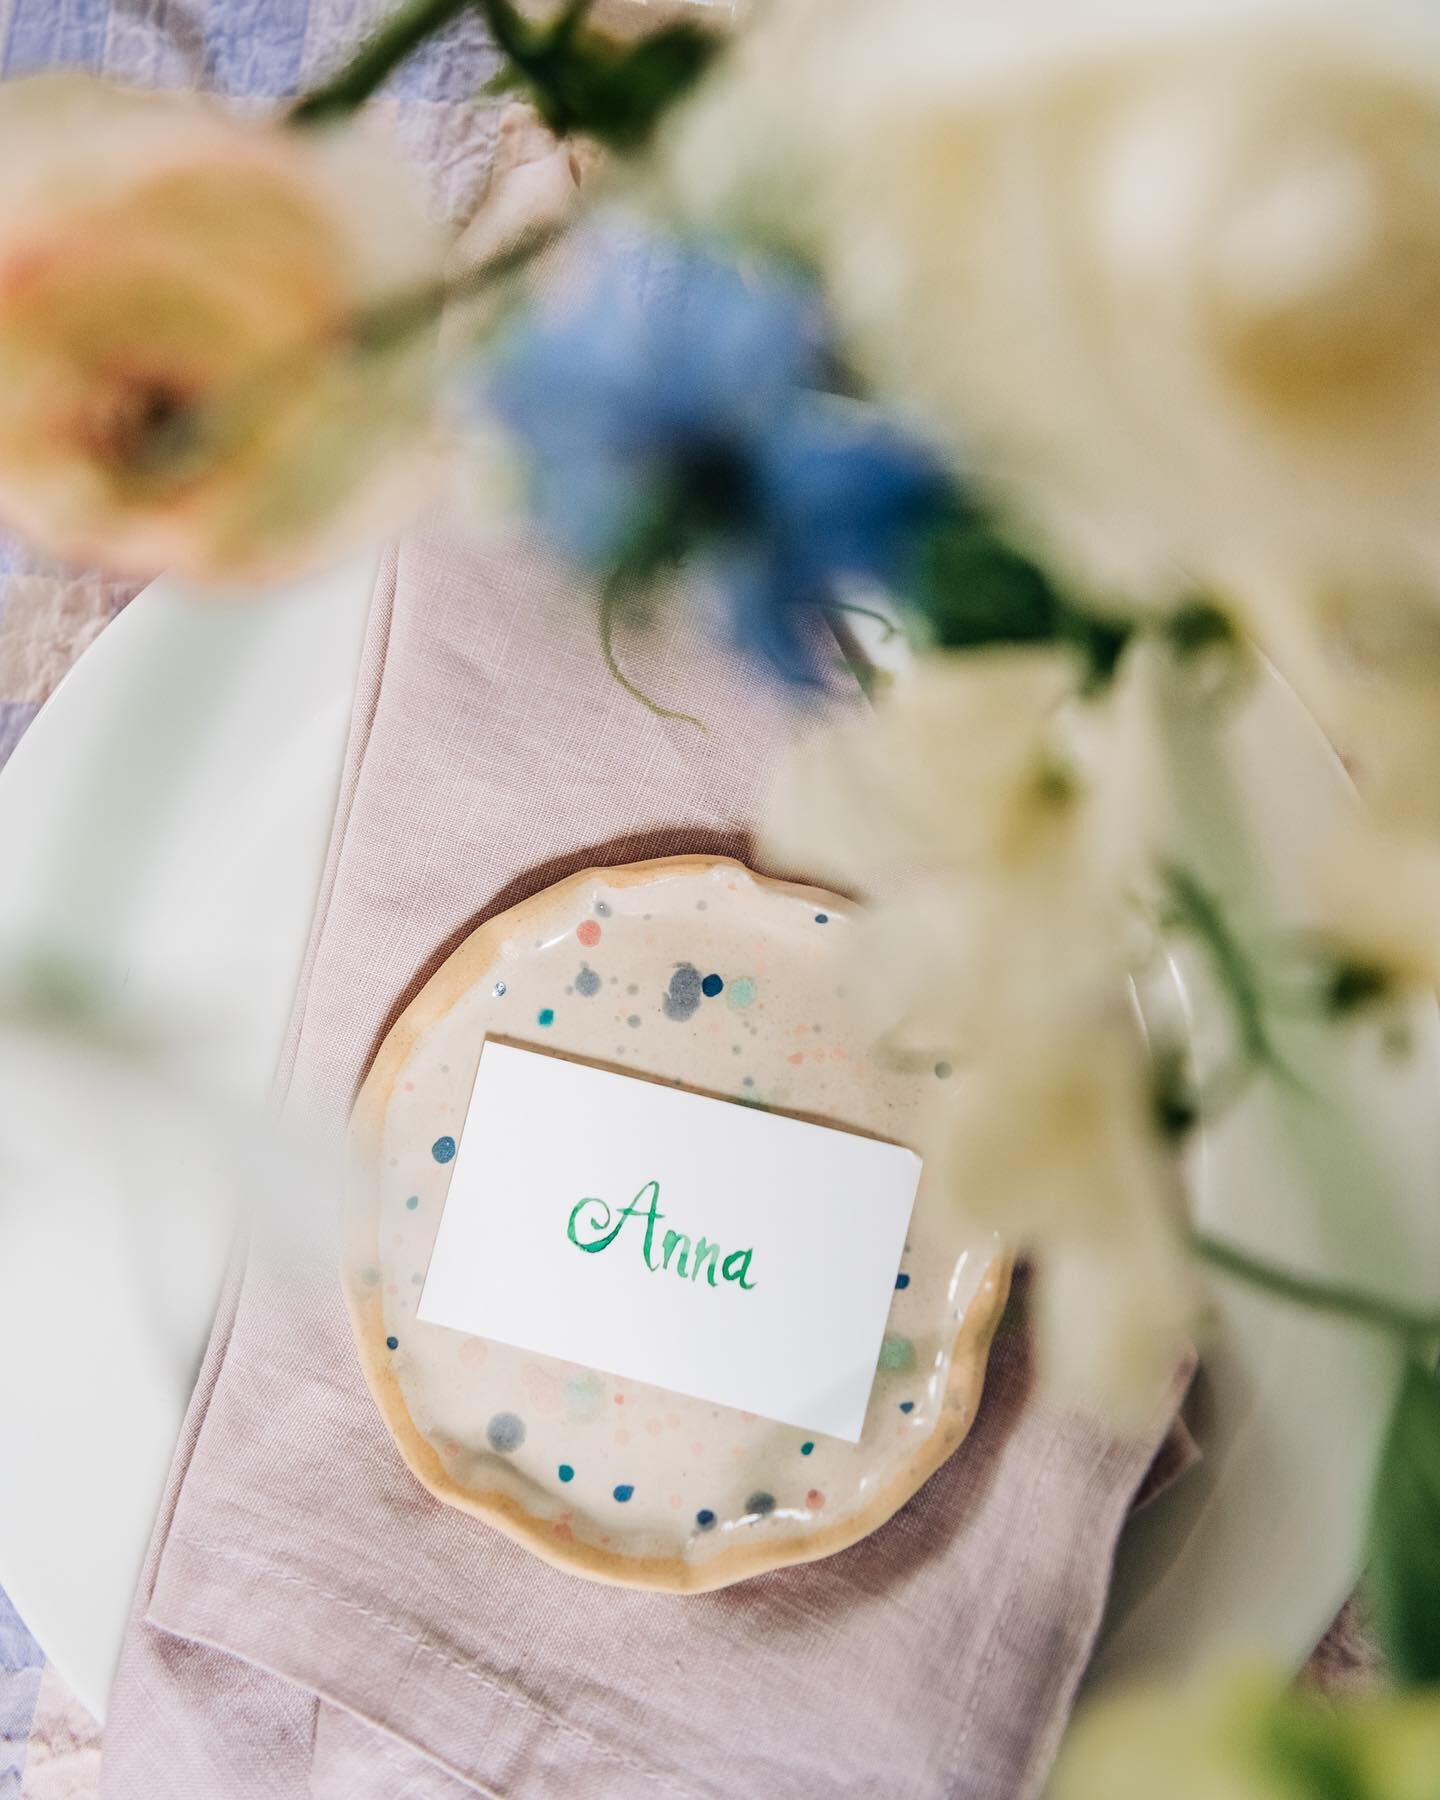 Hand lettered name cards on a beautiful plate by @beicreativestudio 

Photographer @themilescreativeco 
Florist @yellowhouseflowerfarm
Stationery @rachelzuchdesign
Styling and Event Hire @thelittleblacksheephireco
Candles @waxwellcandles 
Ceramics @b